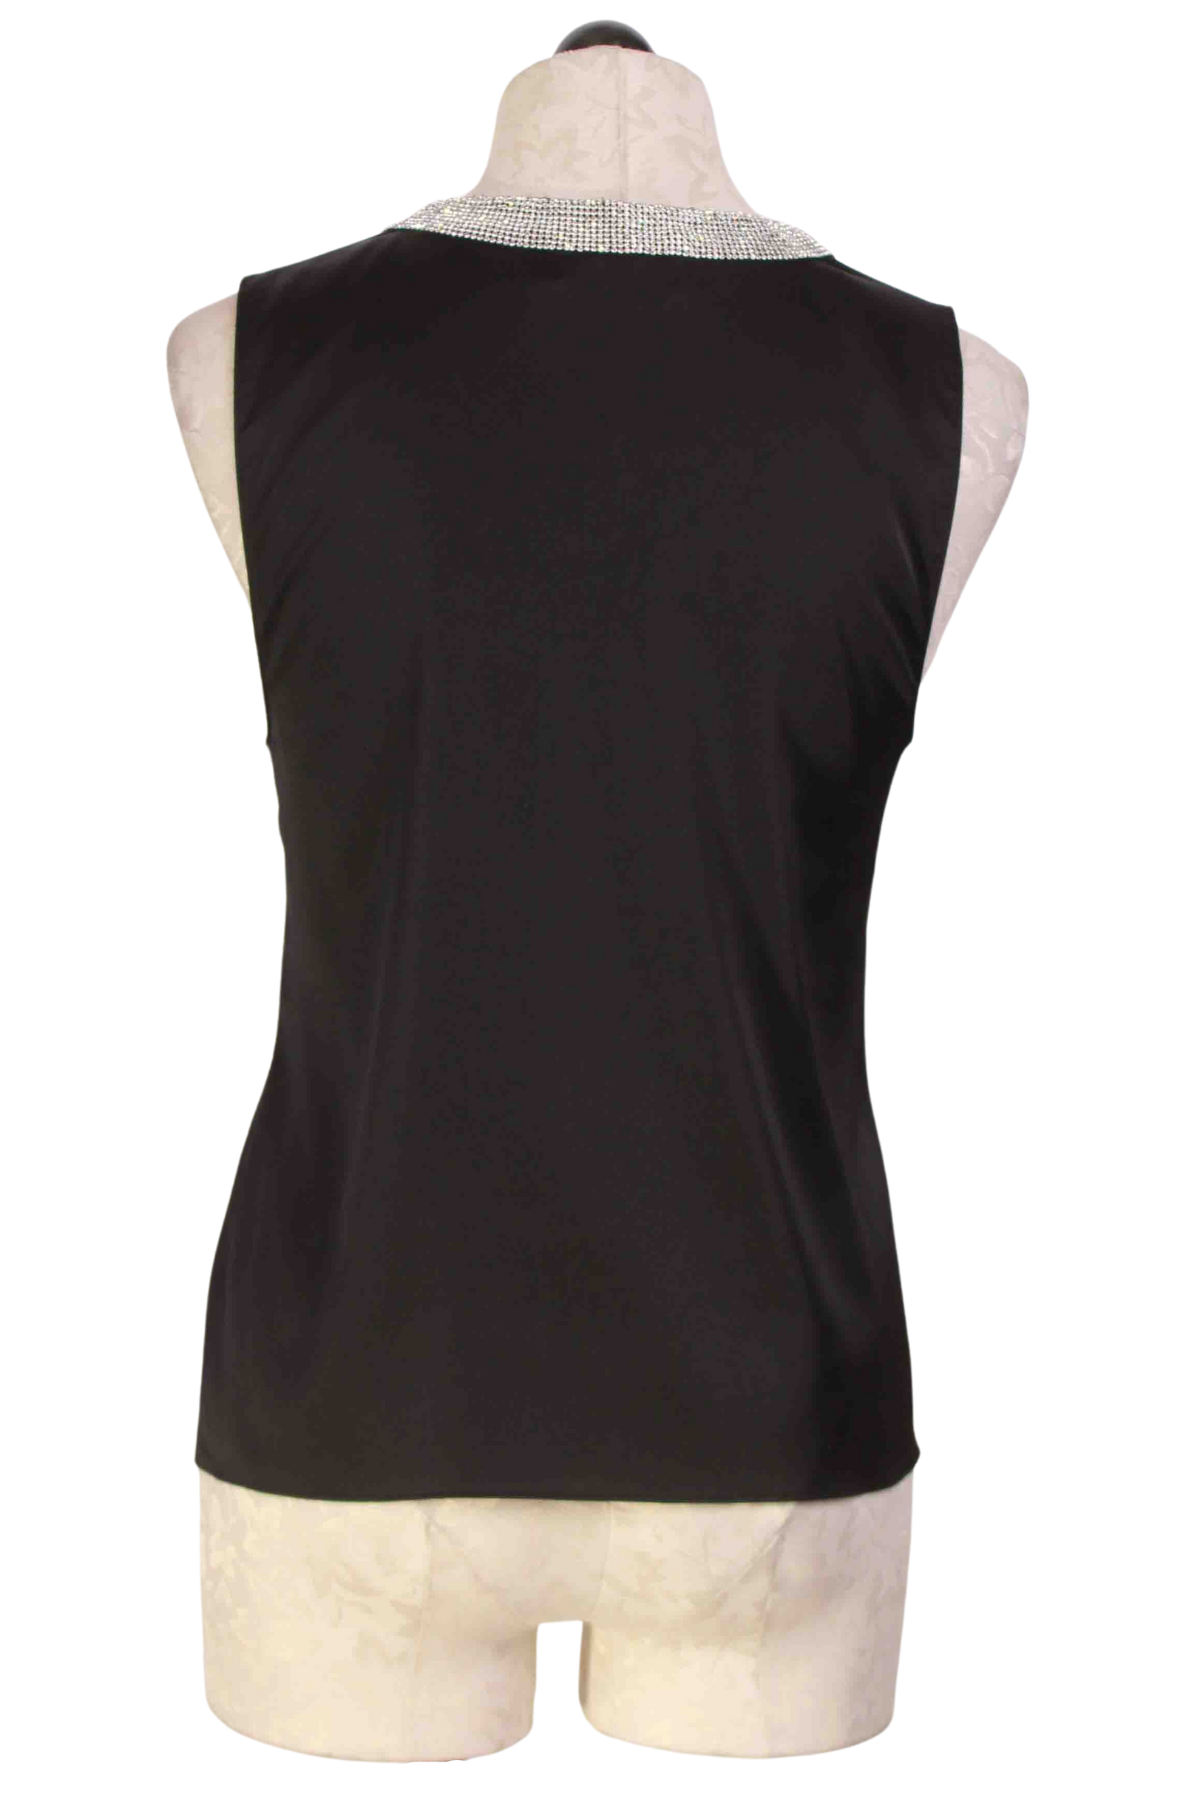 back view of Black Sleeveless Crystal V Neck Candice Top by Generation Love